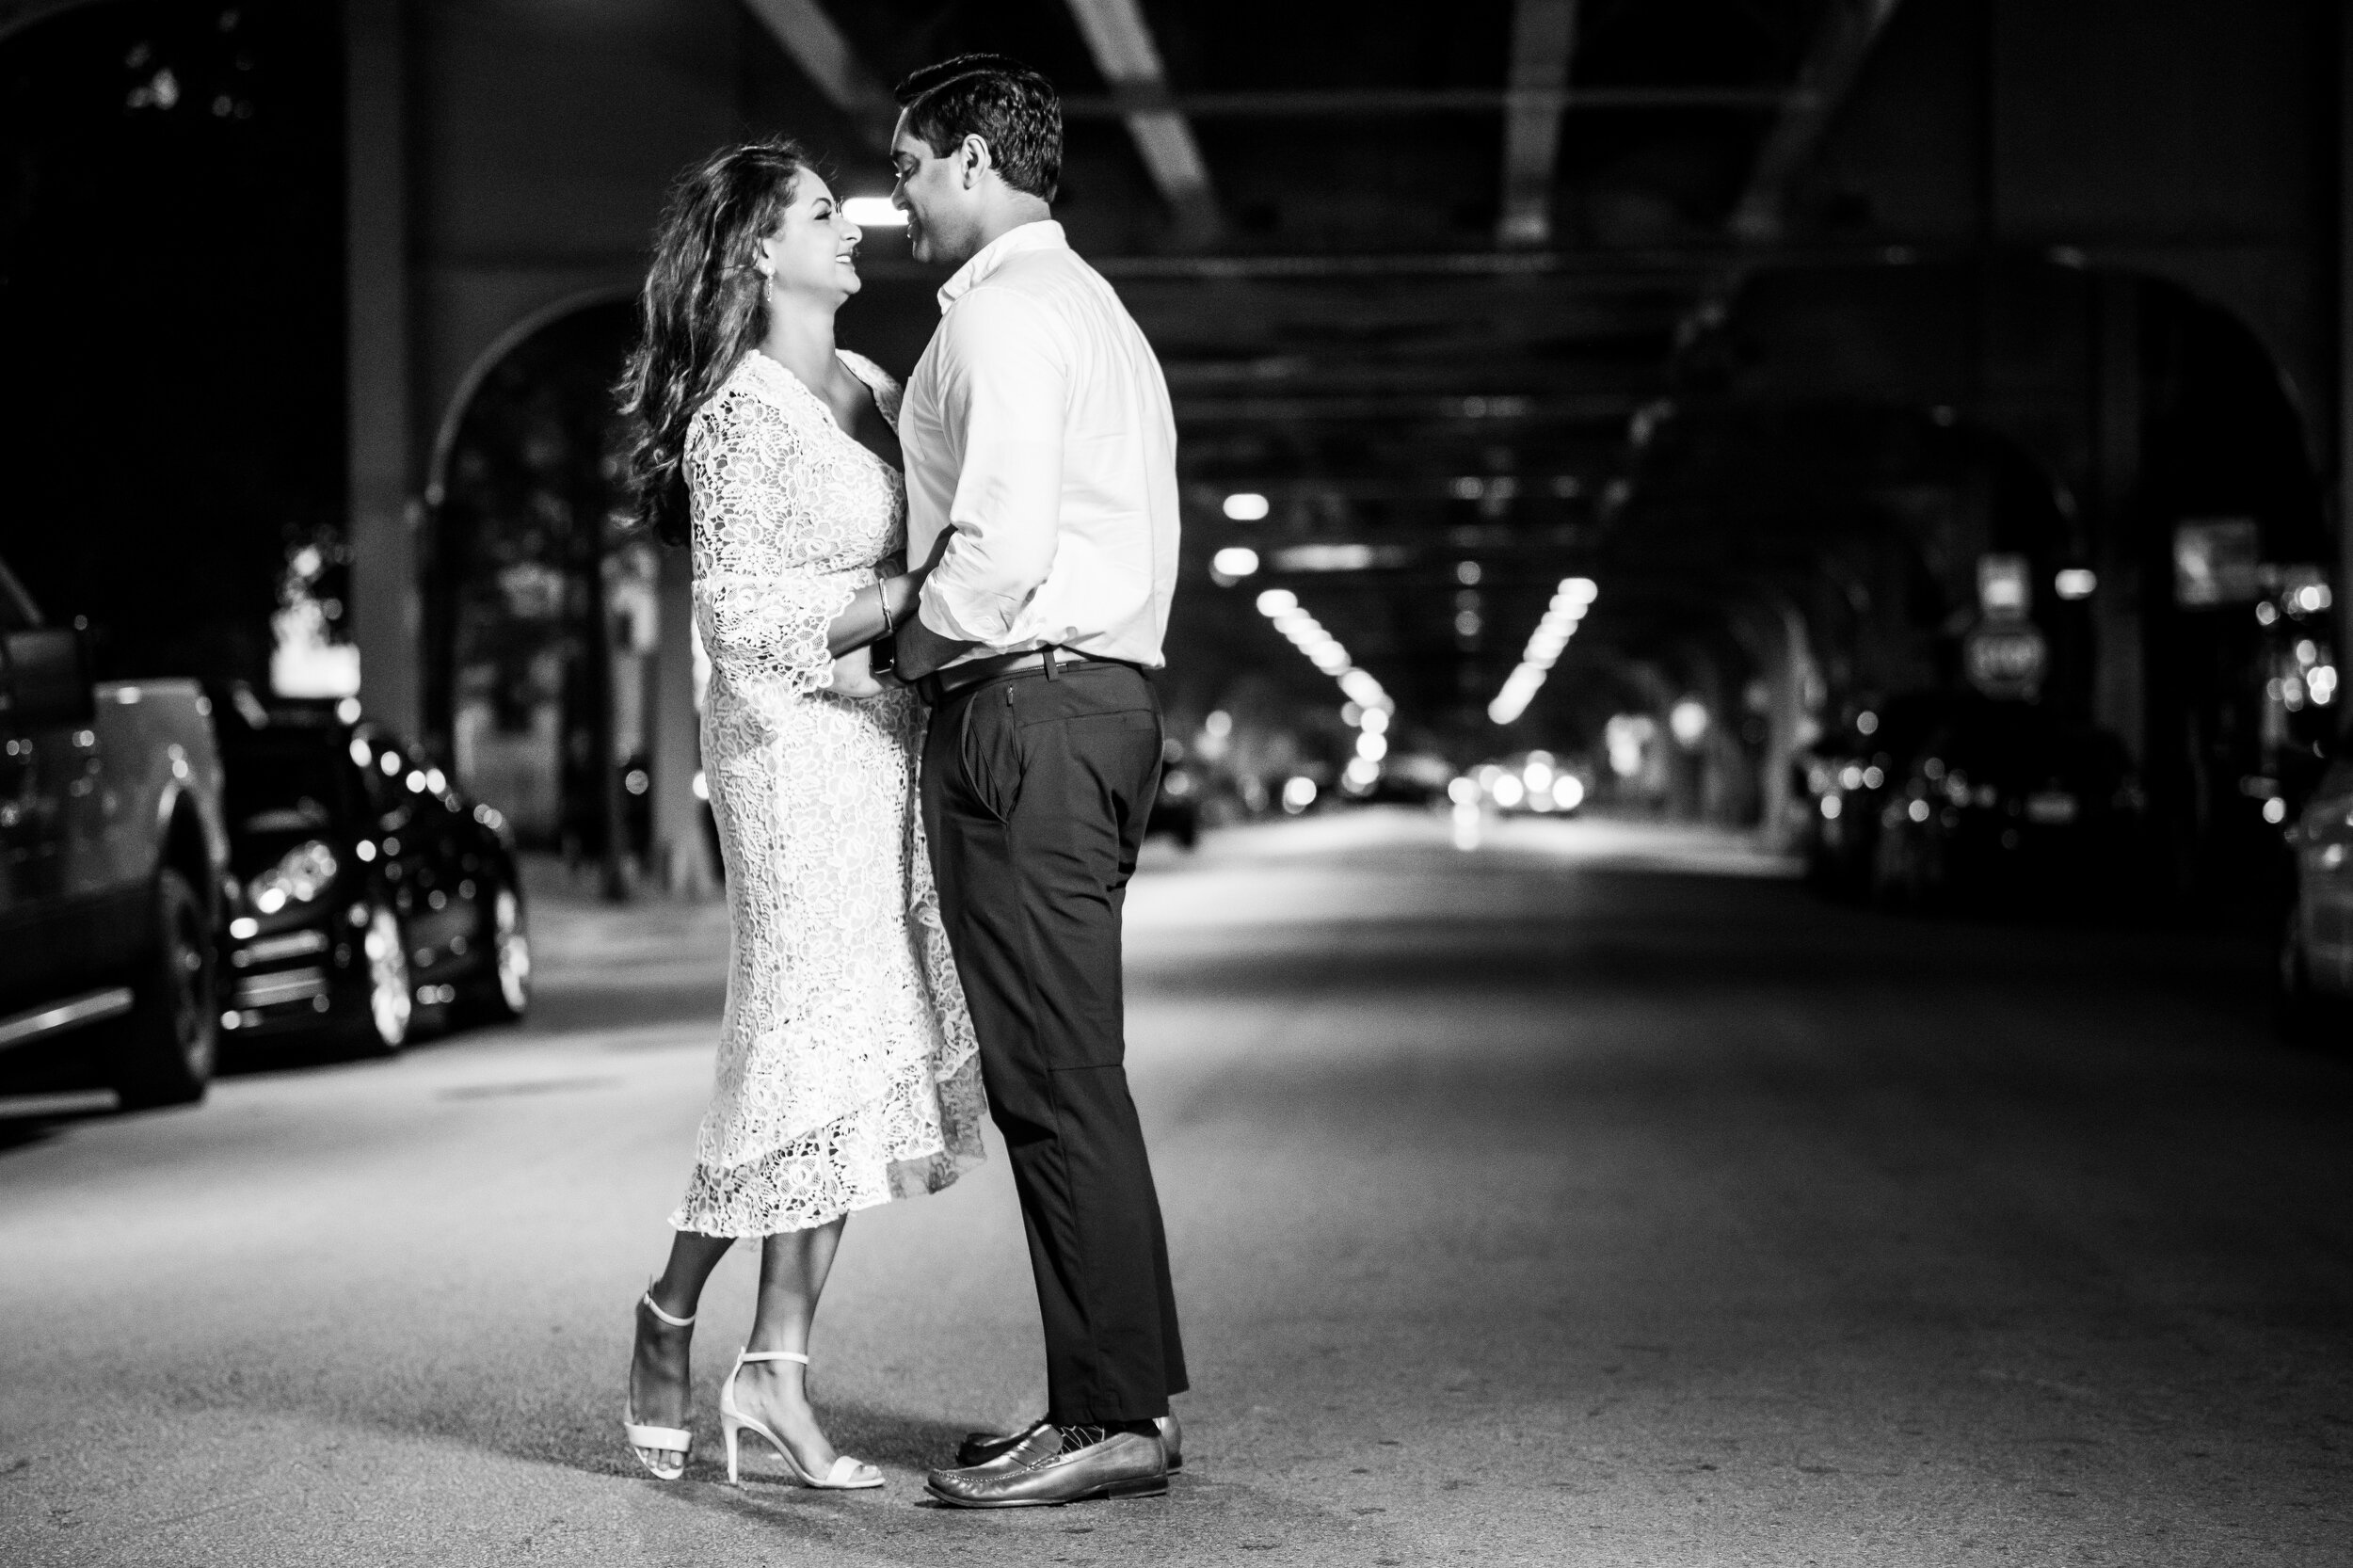 Night engagement photo under the el tracks in Chicago. 